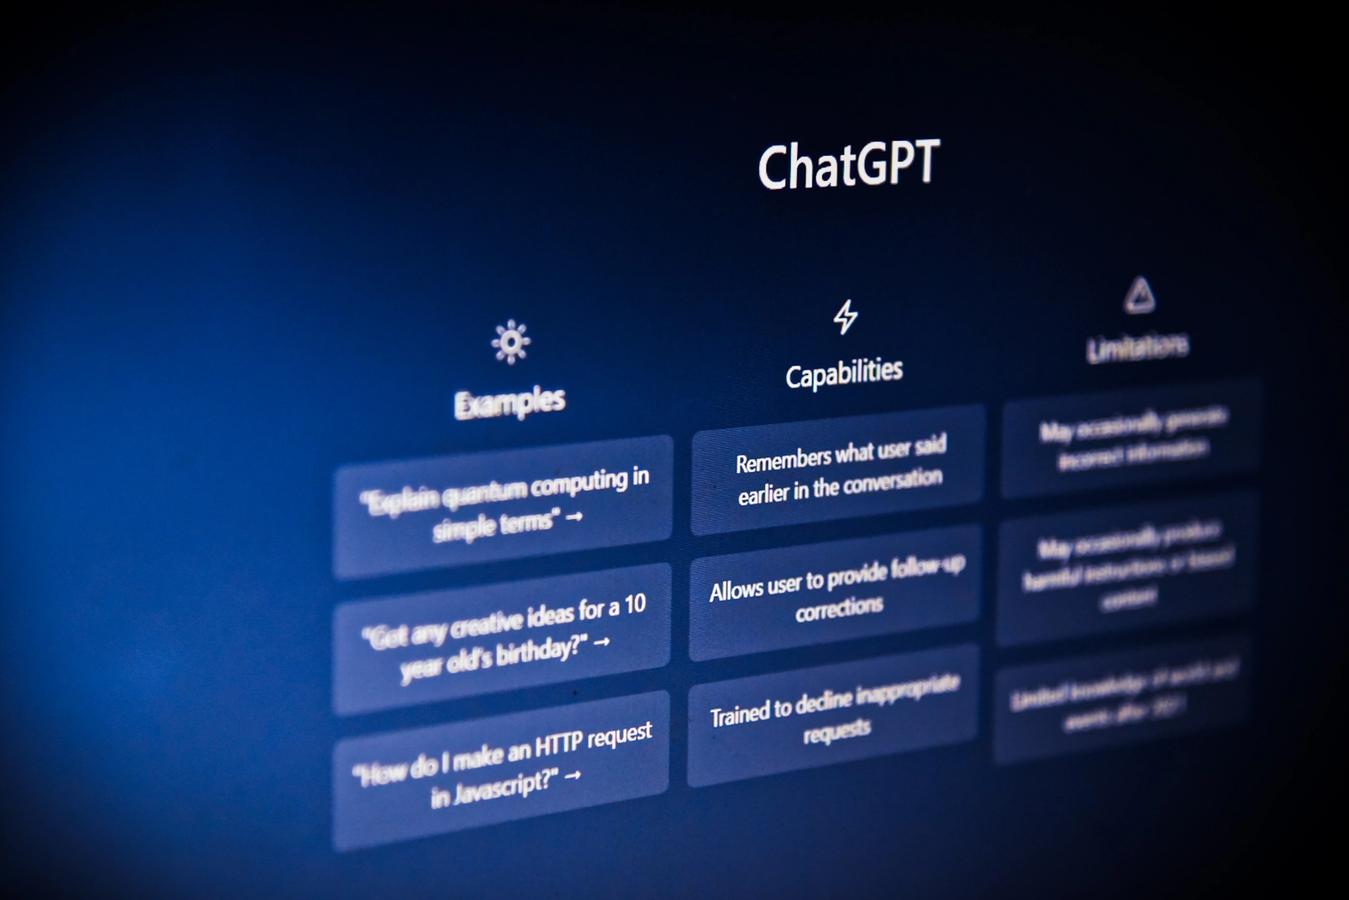 How to use ChatGPT in Italy